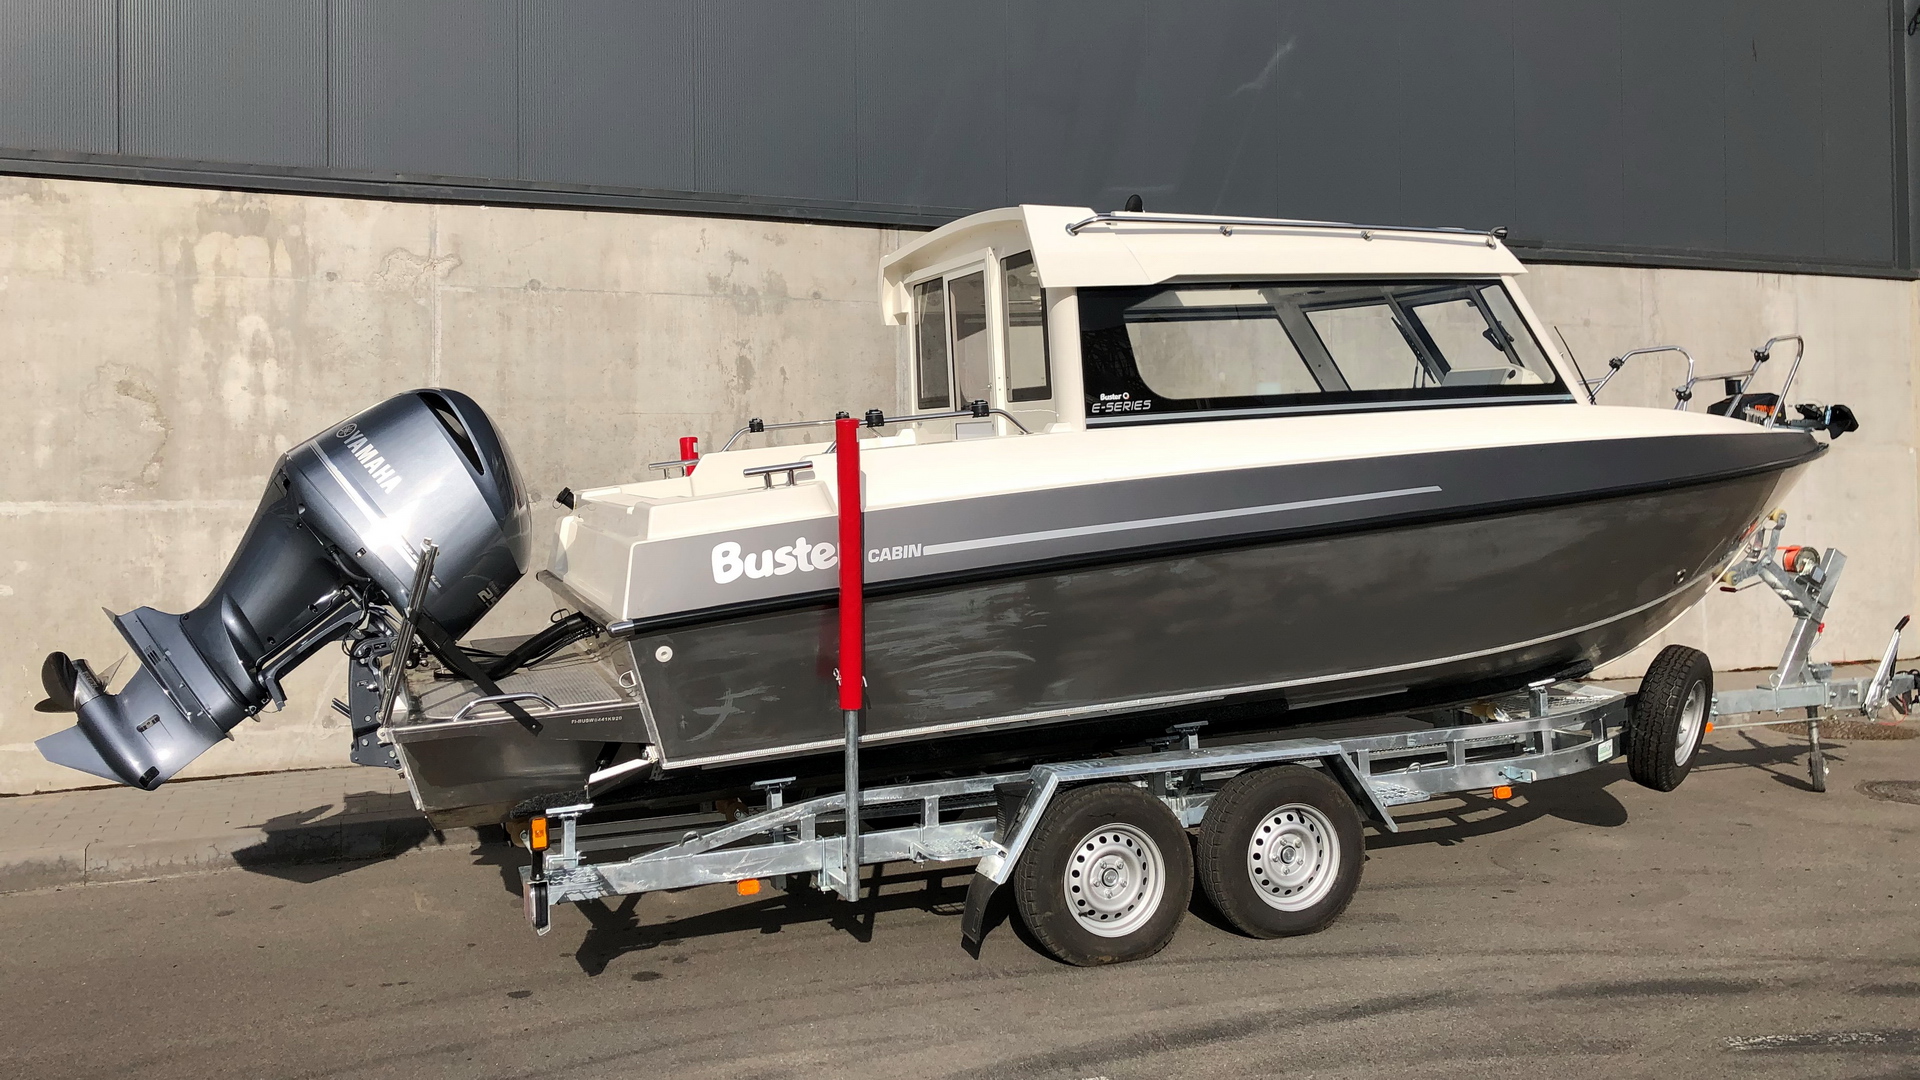 BUSTER CABIN Q, BUSTER CABIN, Алюминиевая лодка Buster, Алюминиевая лодка Buster CABIN Q, Aluminium boat BUSTER CABIN Q, Алюминиевая лодка Buster CABIN, Aluminium boat BUSTER CABIN, Алюминиевый катер BUSTER CABIN Q, Алюминиевый катер BUSTER CABIN, Алюминиевый катер BUSTER